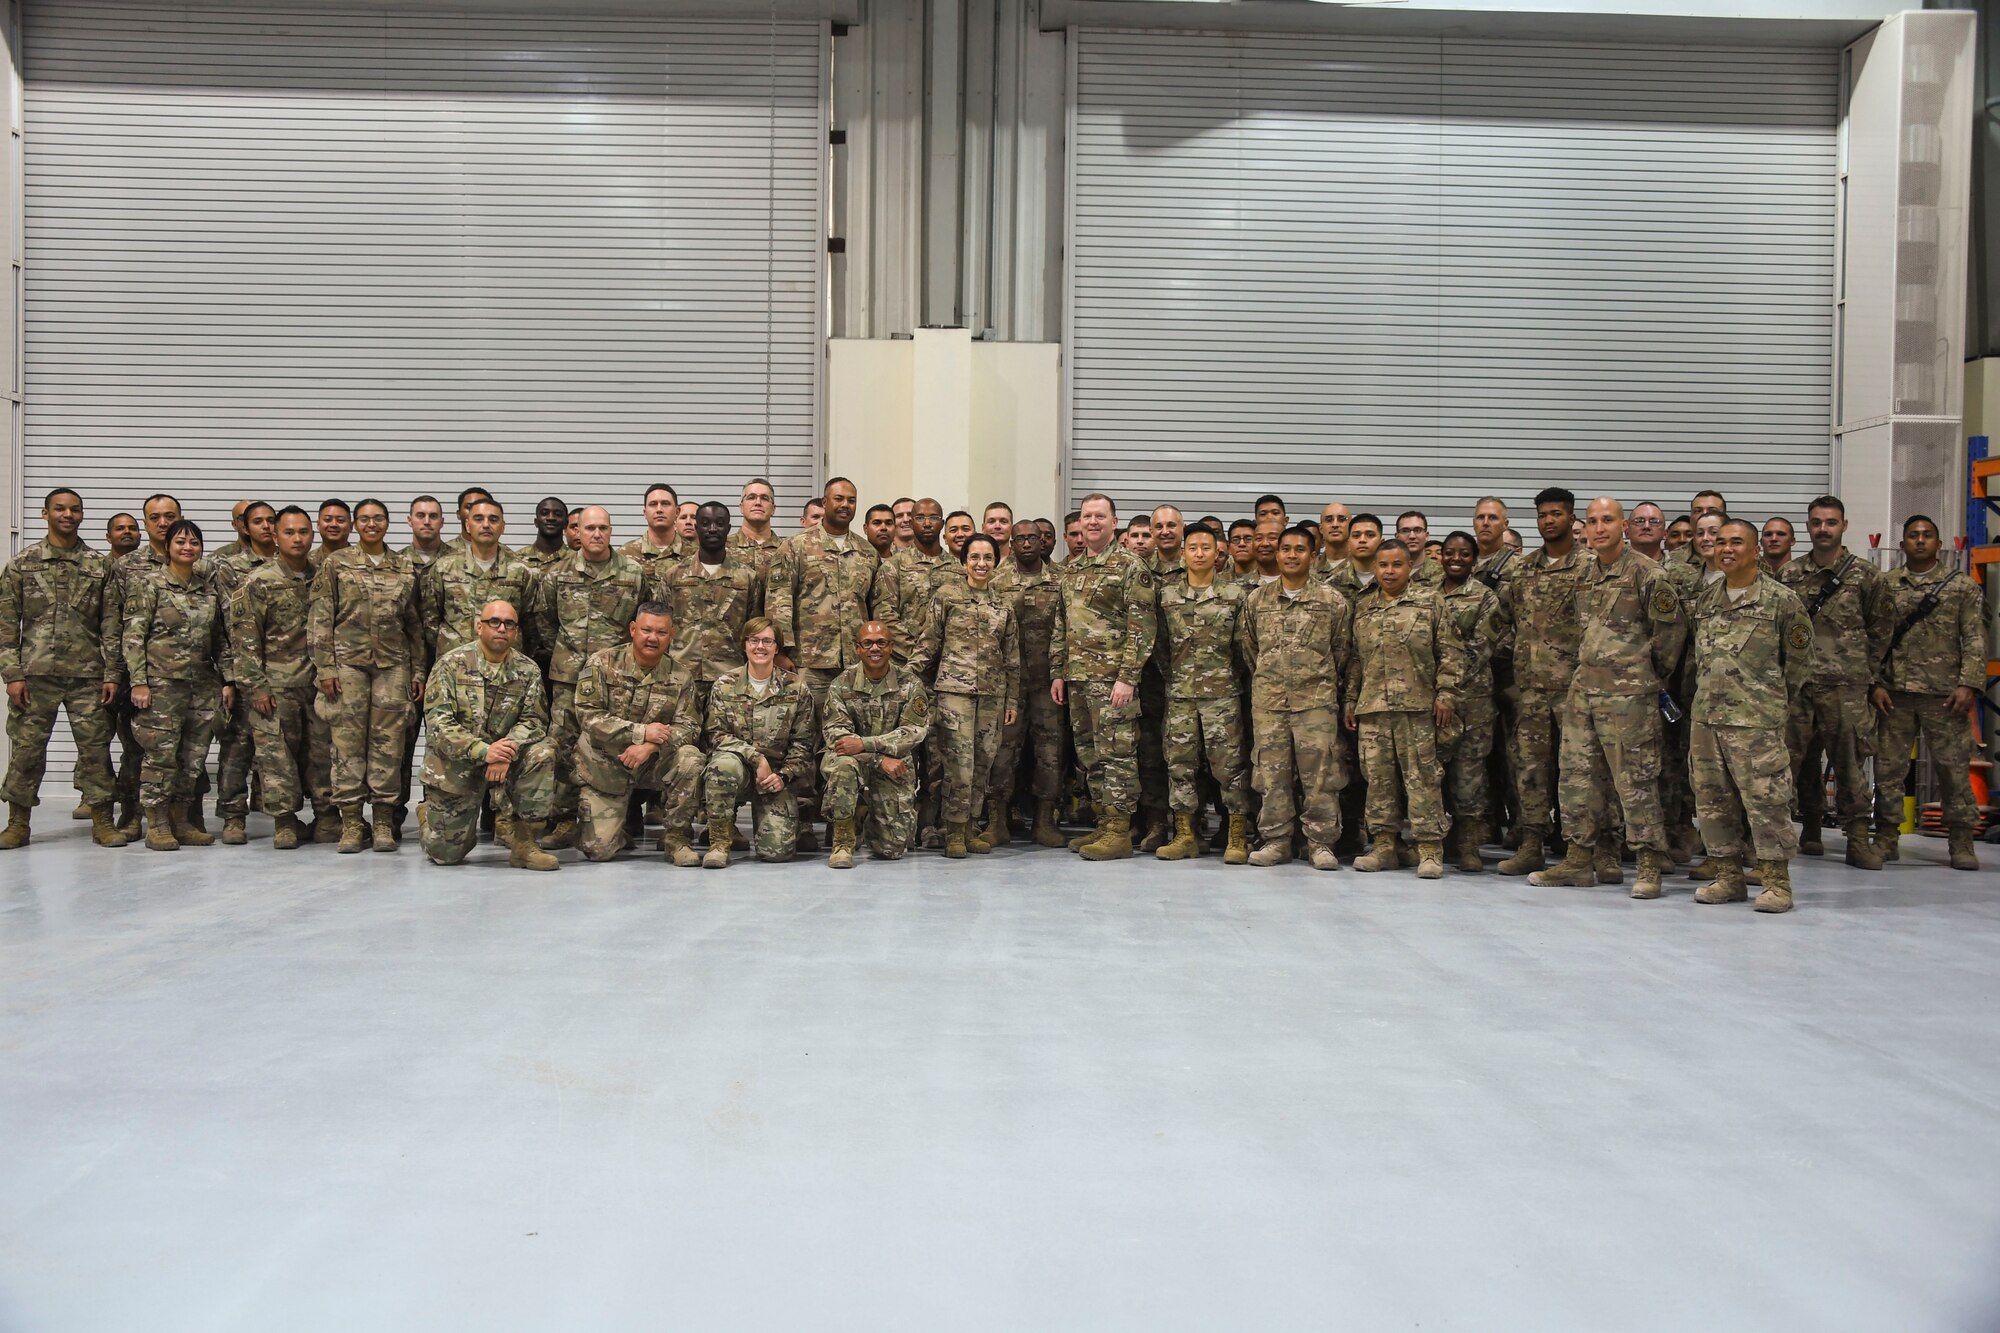 U.S. Air Force Lt. Gen. Richard Scobee, commander of Air Force Reserve Command, and Chief Master Sgt. Ericka Kelly, command chief of AFRC, pose for a photo with members of the 380th Expeditionary Civil Engineer Squadron during their visit to Al Dhafra Air Base, United Arab Emirates, Feb. 13 2019.